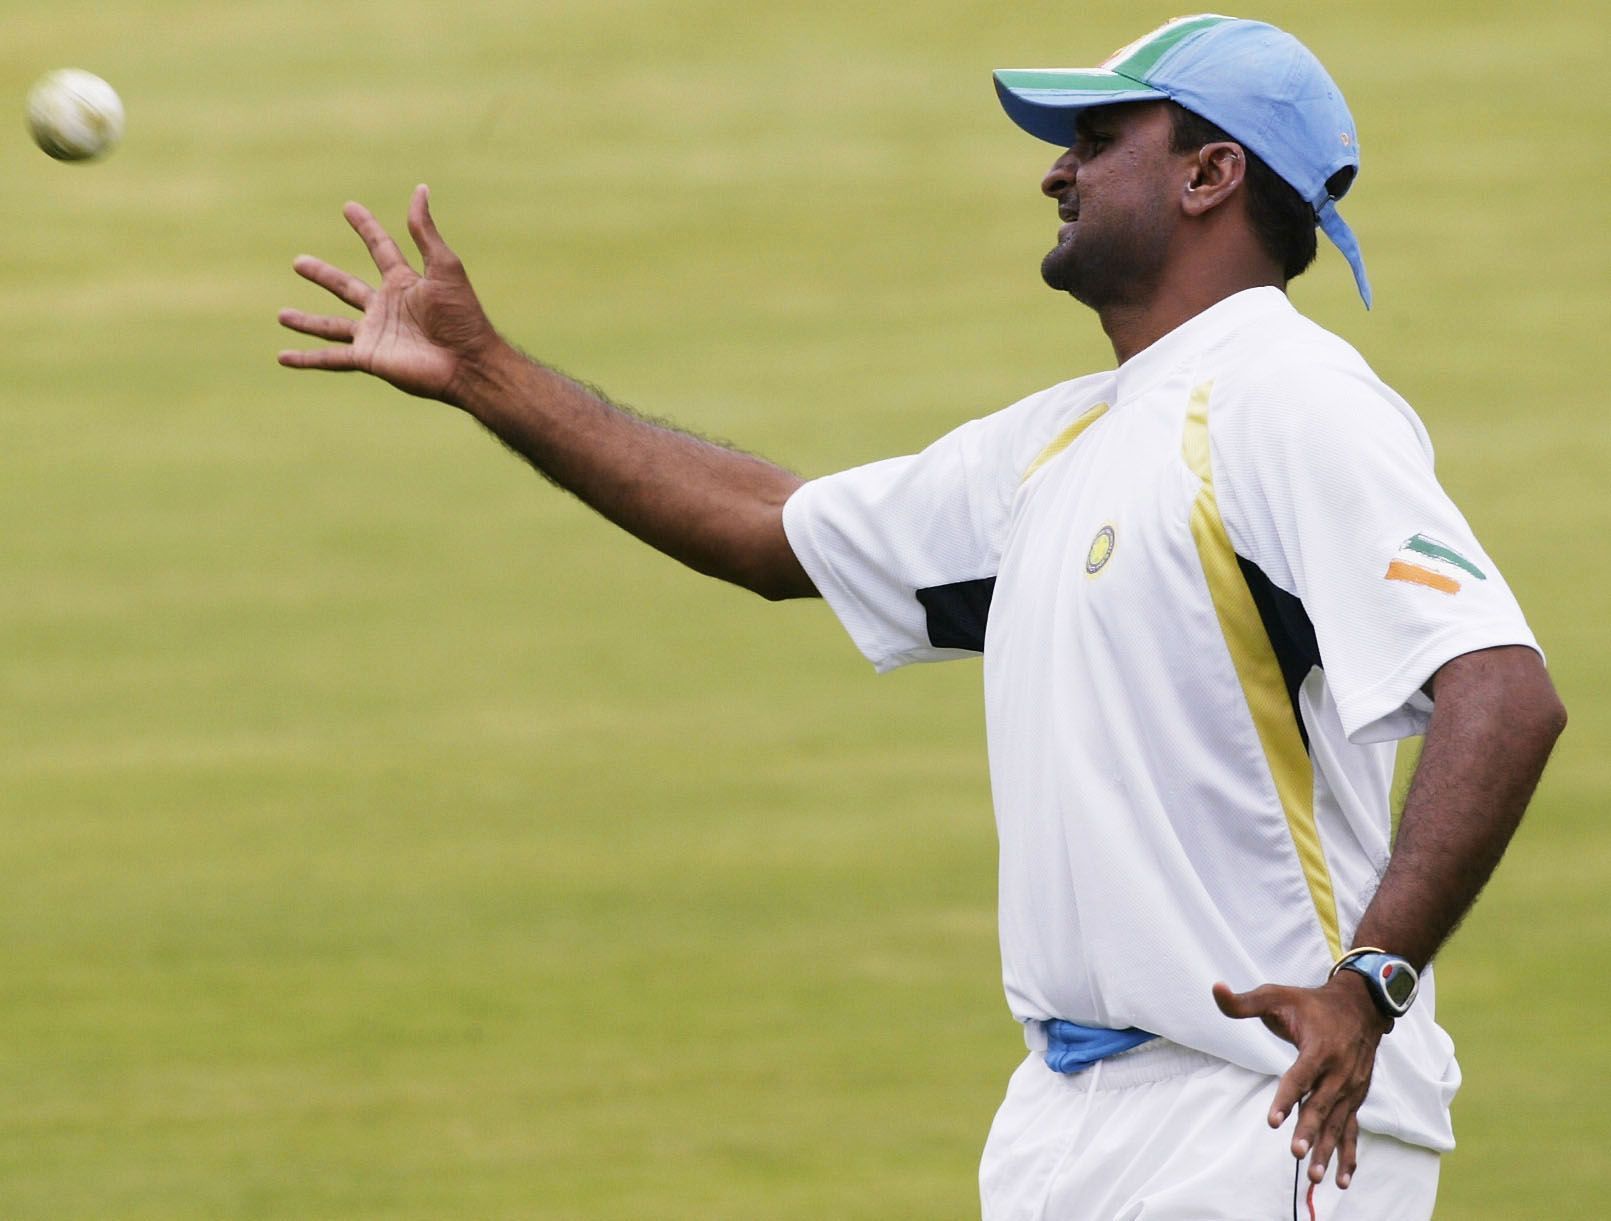 Javagal Srinath is the most successful Indian pacer in South Africa picking up 43 Test wickets